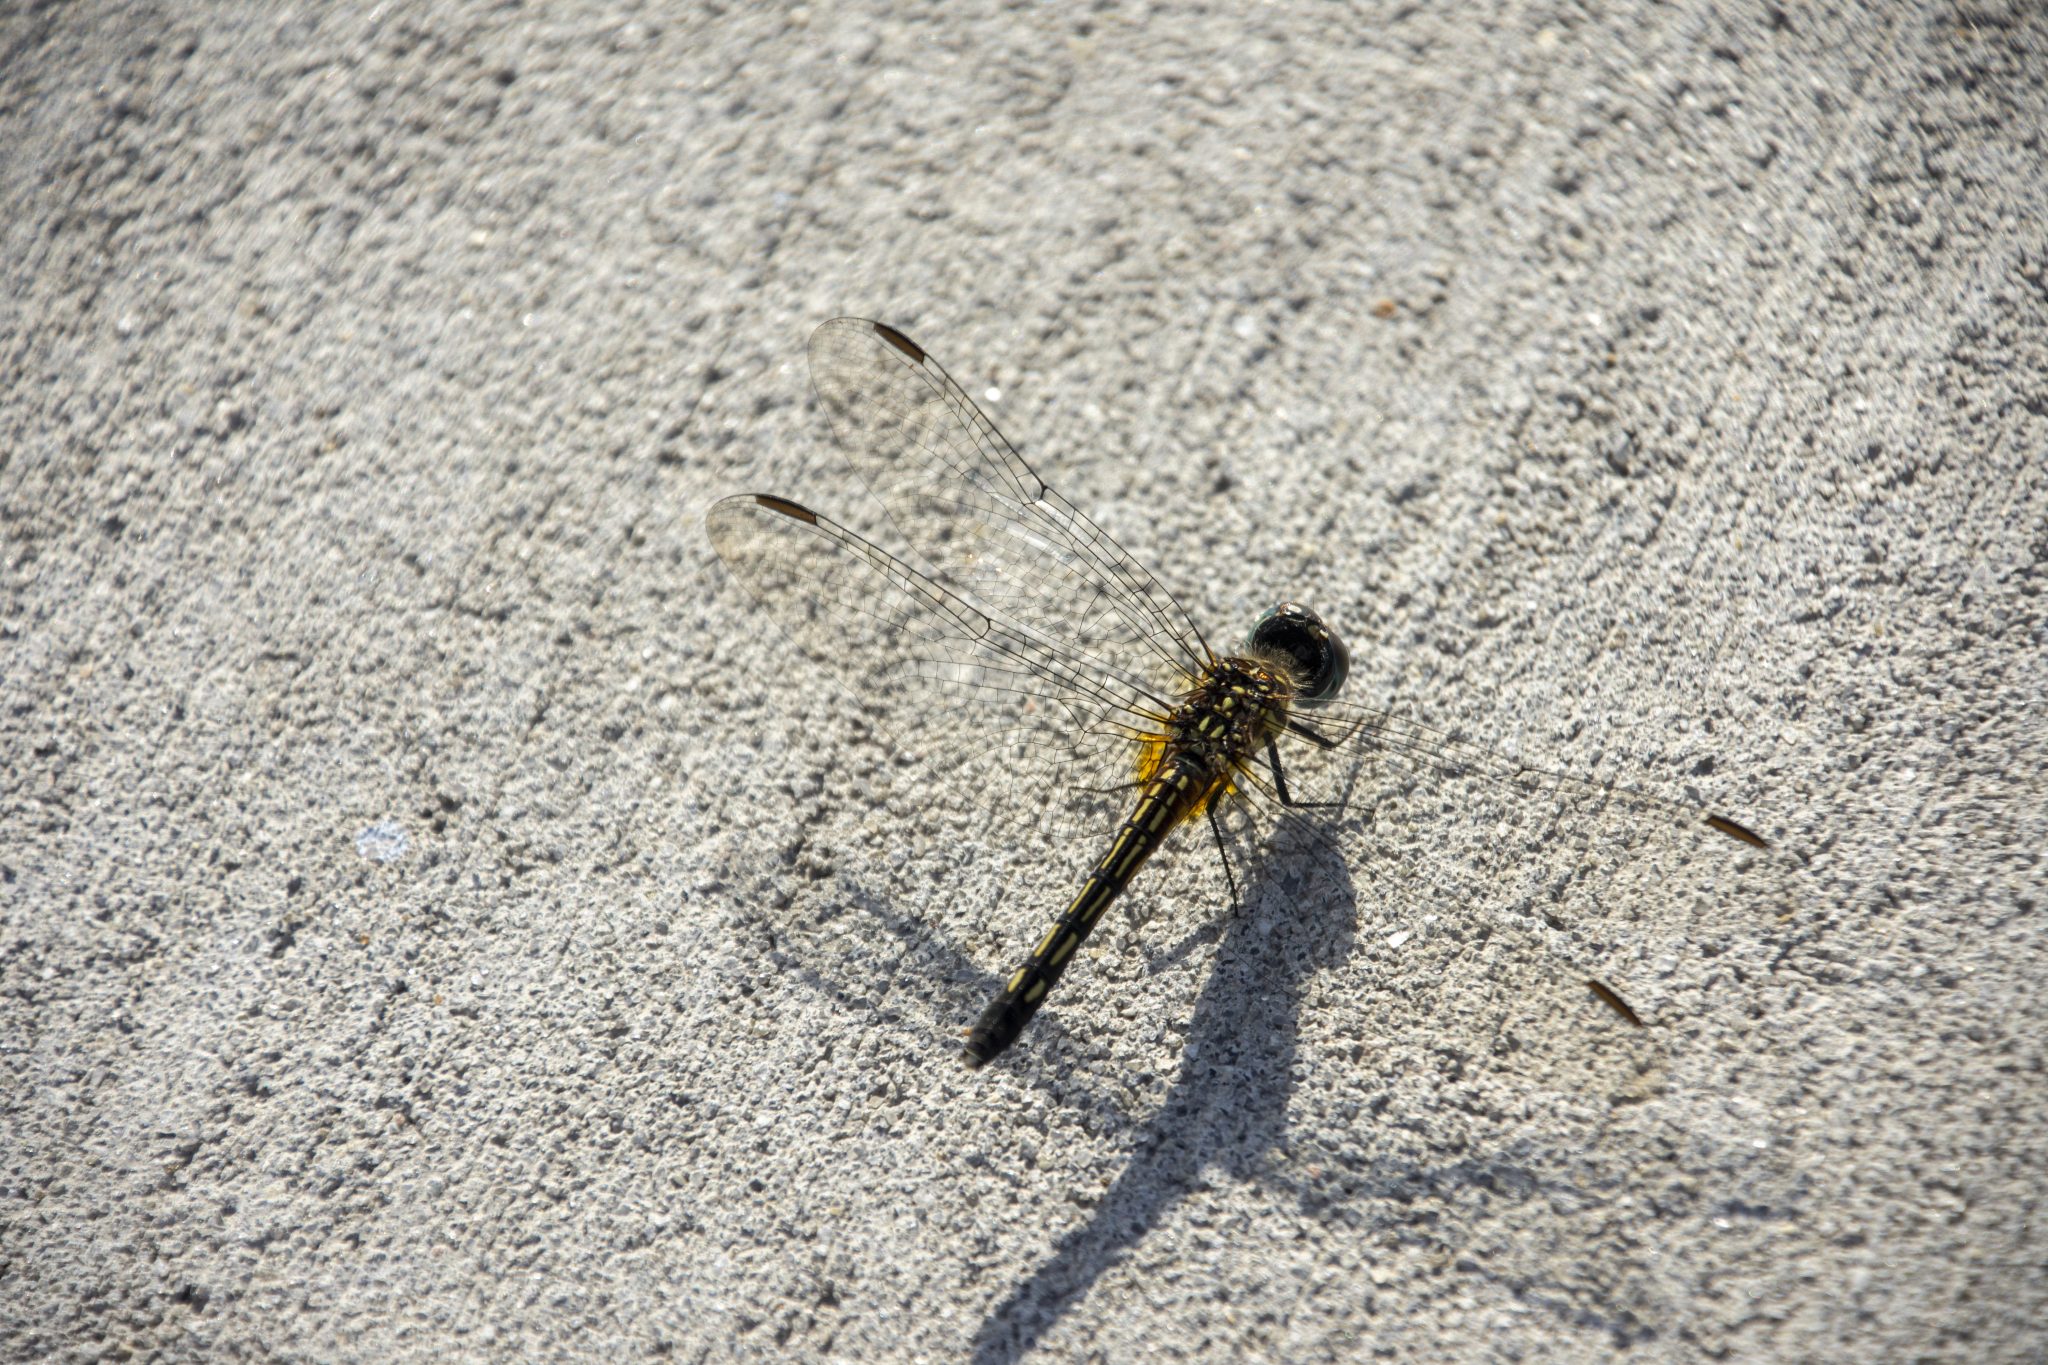 Close-up of a dragonfly on a sidewalk